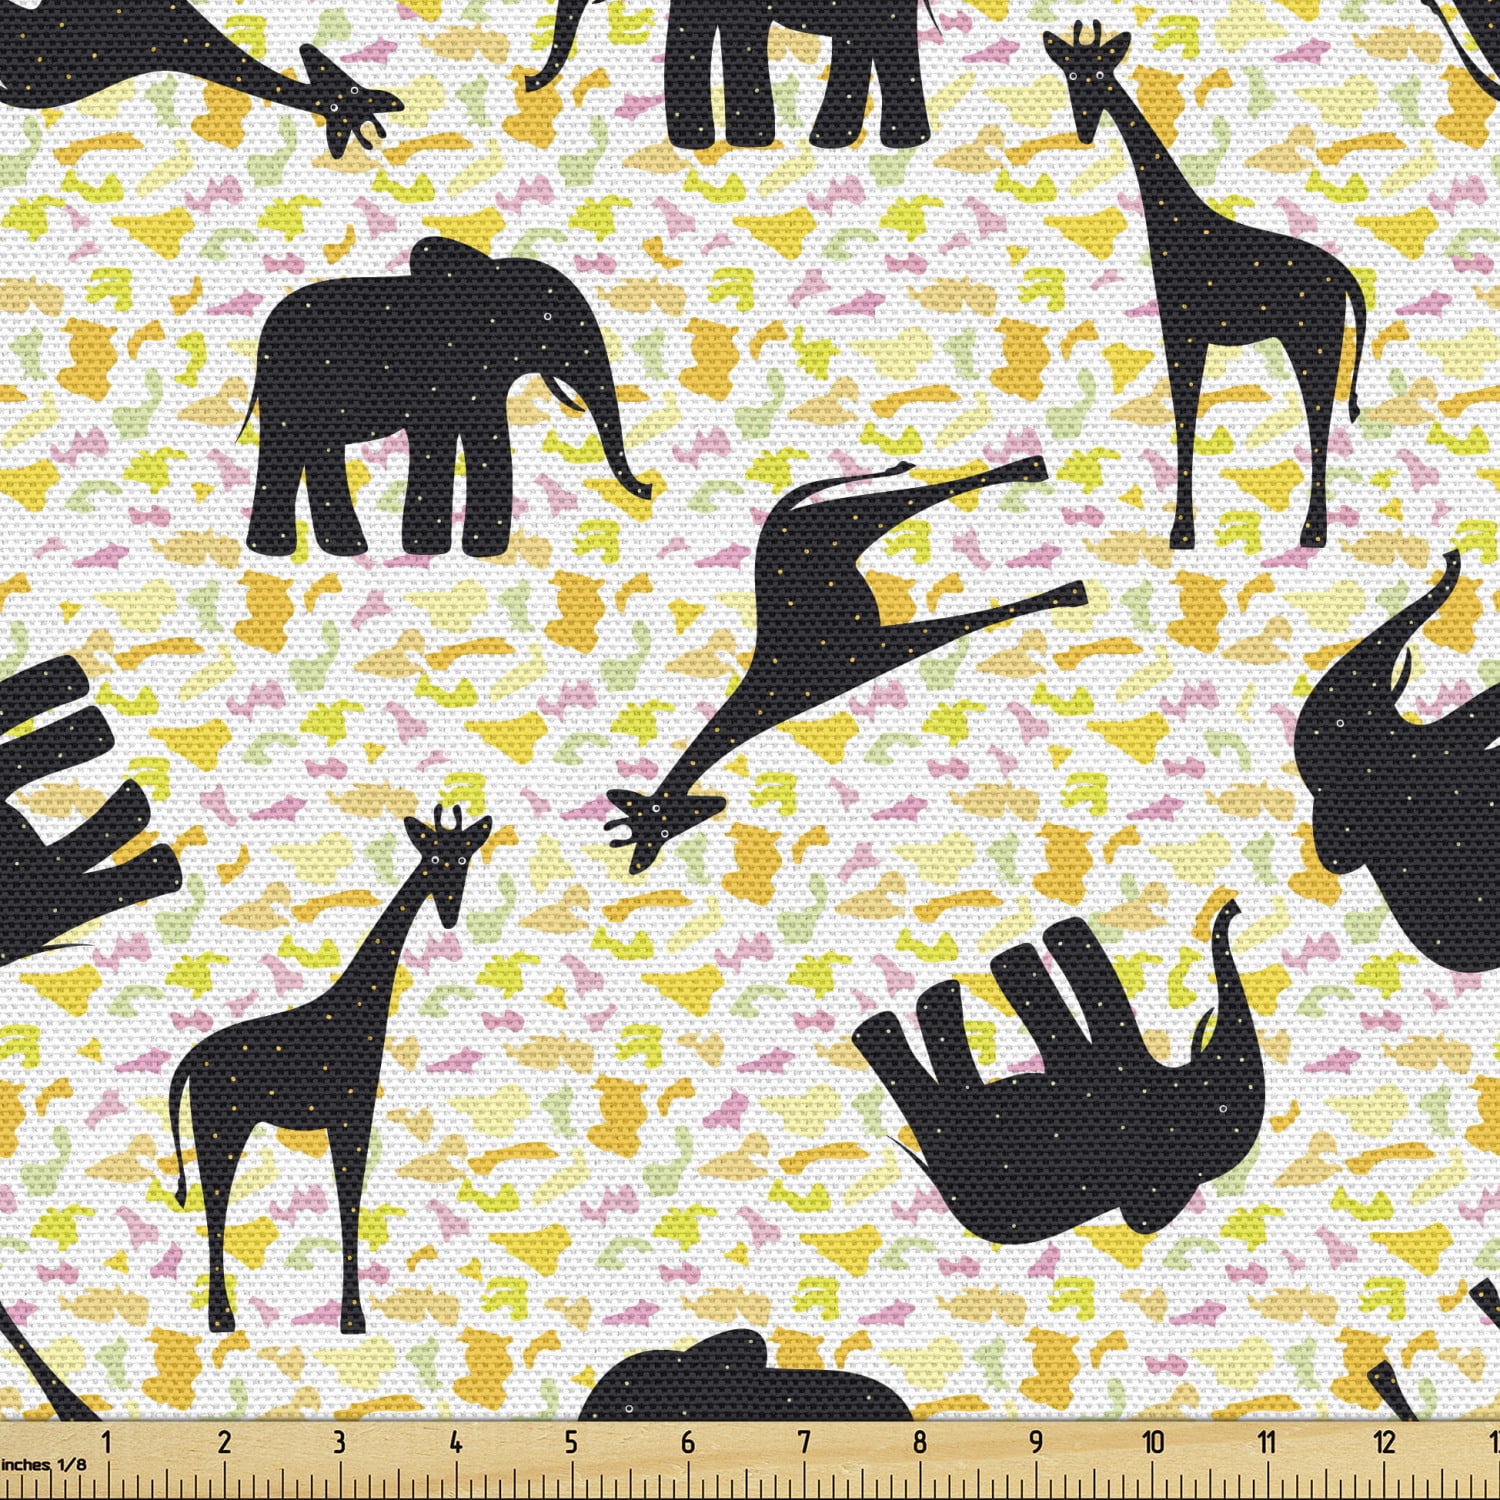 Giraffe Fabric by the Yard, Pattern with Cartoon Giraffes and Elephants on  Spotty Background Wildlife, Upholstery Fabric for Dining Chairs Home Decor  Accents, 3 Yards, Multicolor by Ambesonne 